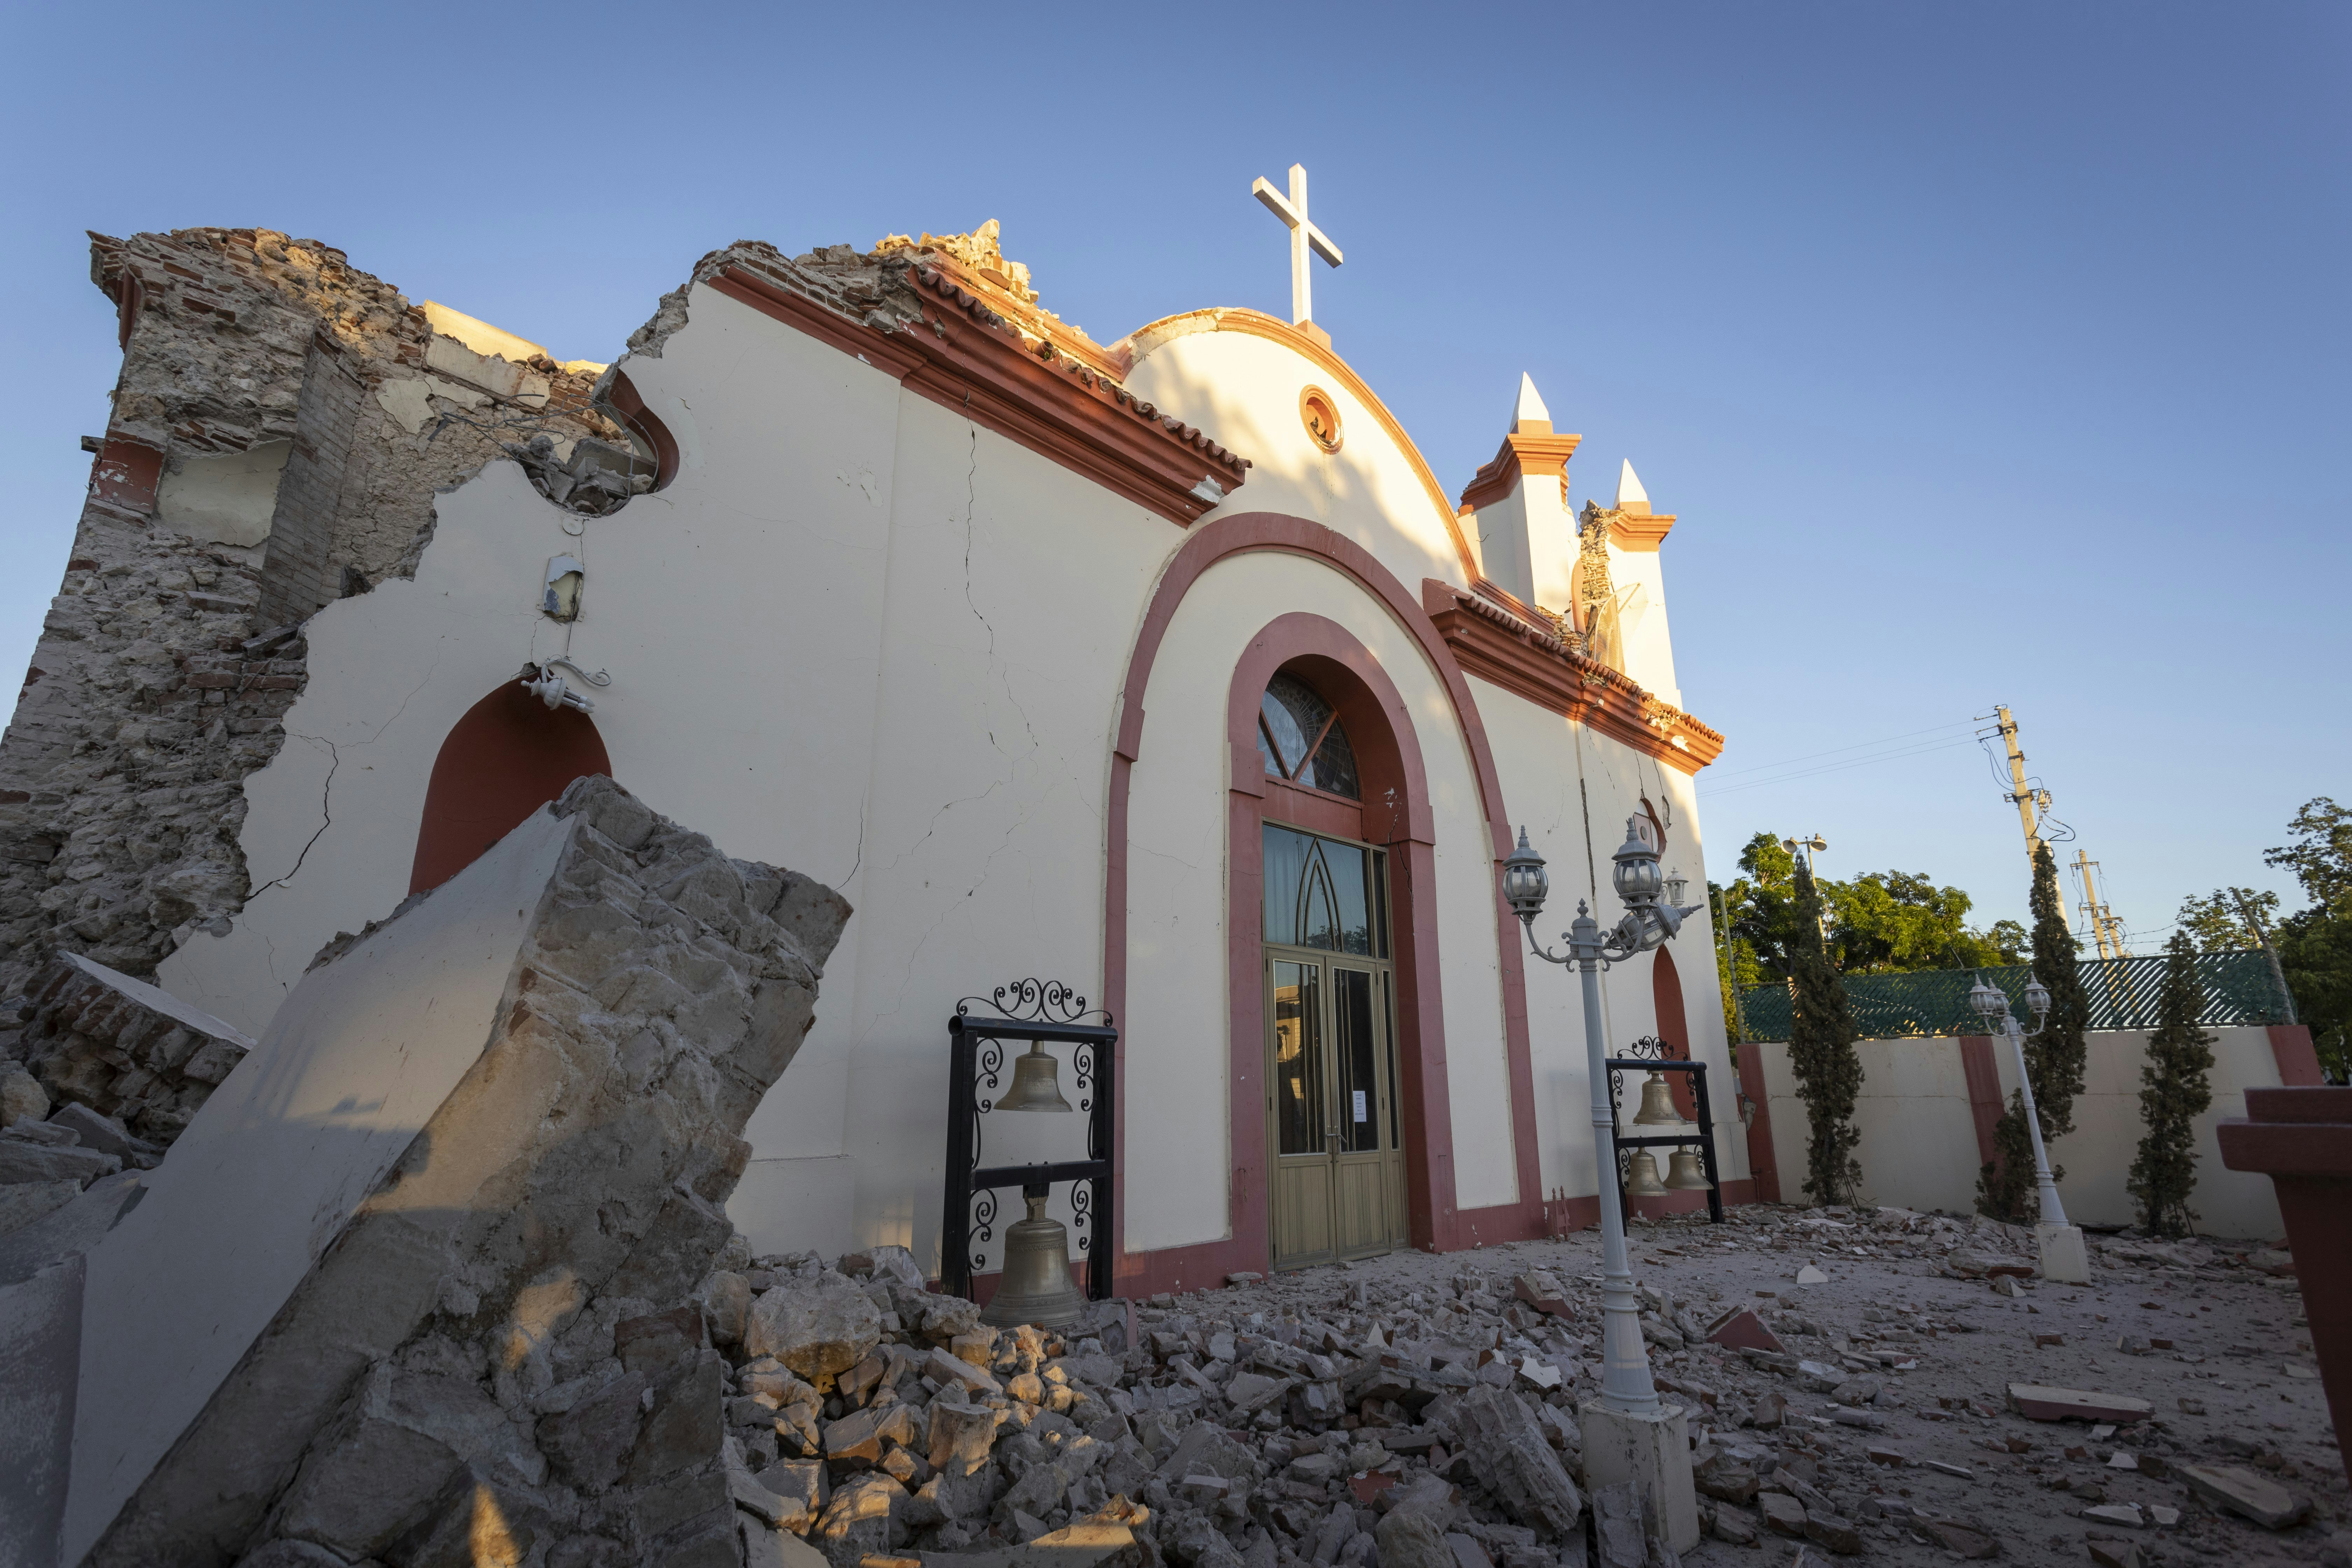 The front facade of this Catholic Church in Guayanilla, Puerto Rico is surrounded by rubble after the 2020 earthquakes